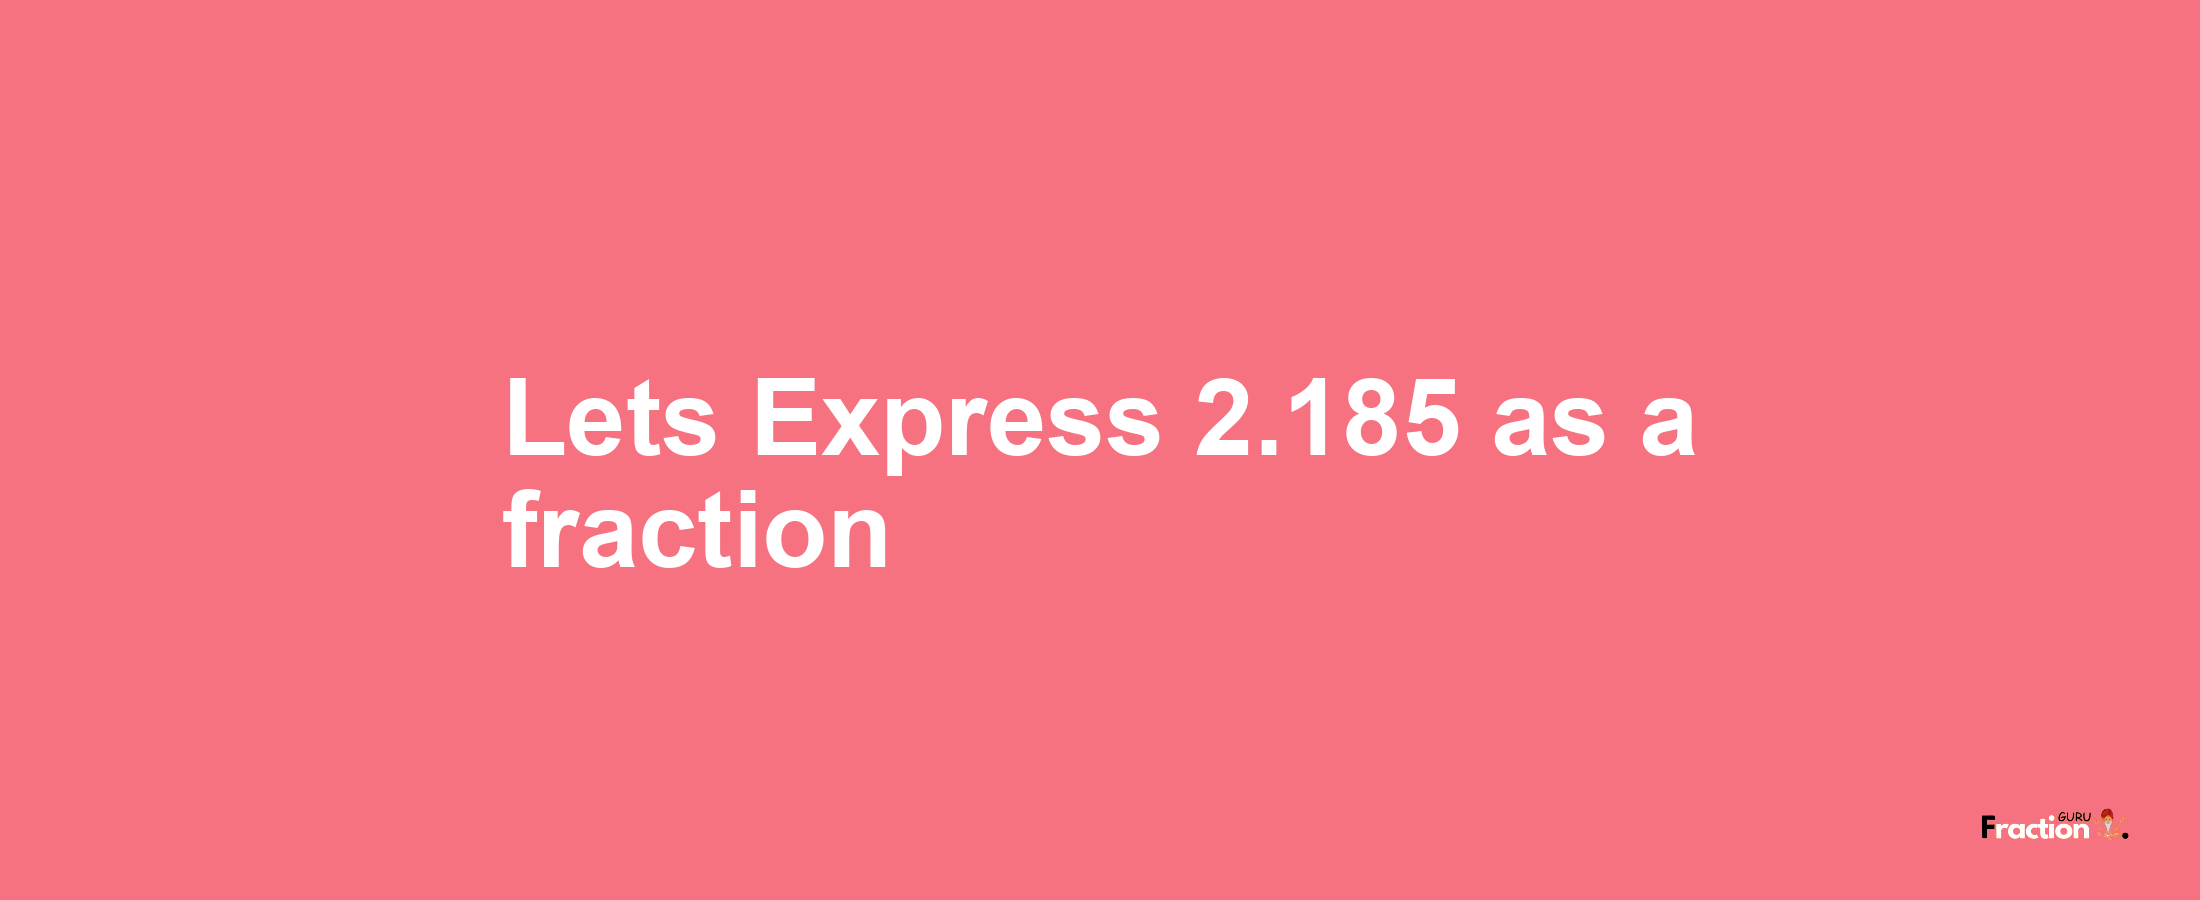 Lets Express 2.185 as afraction